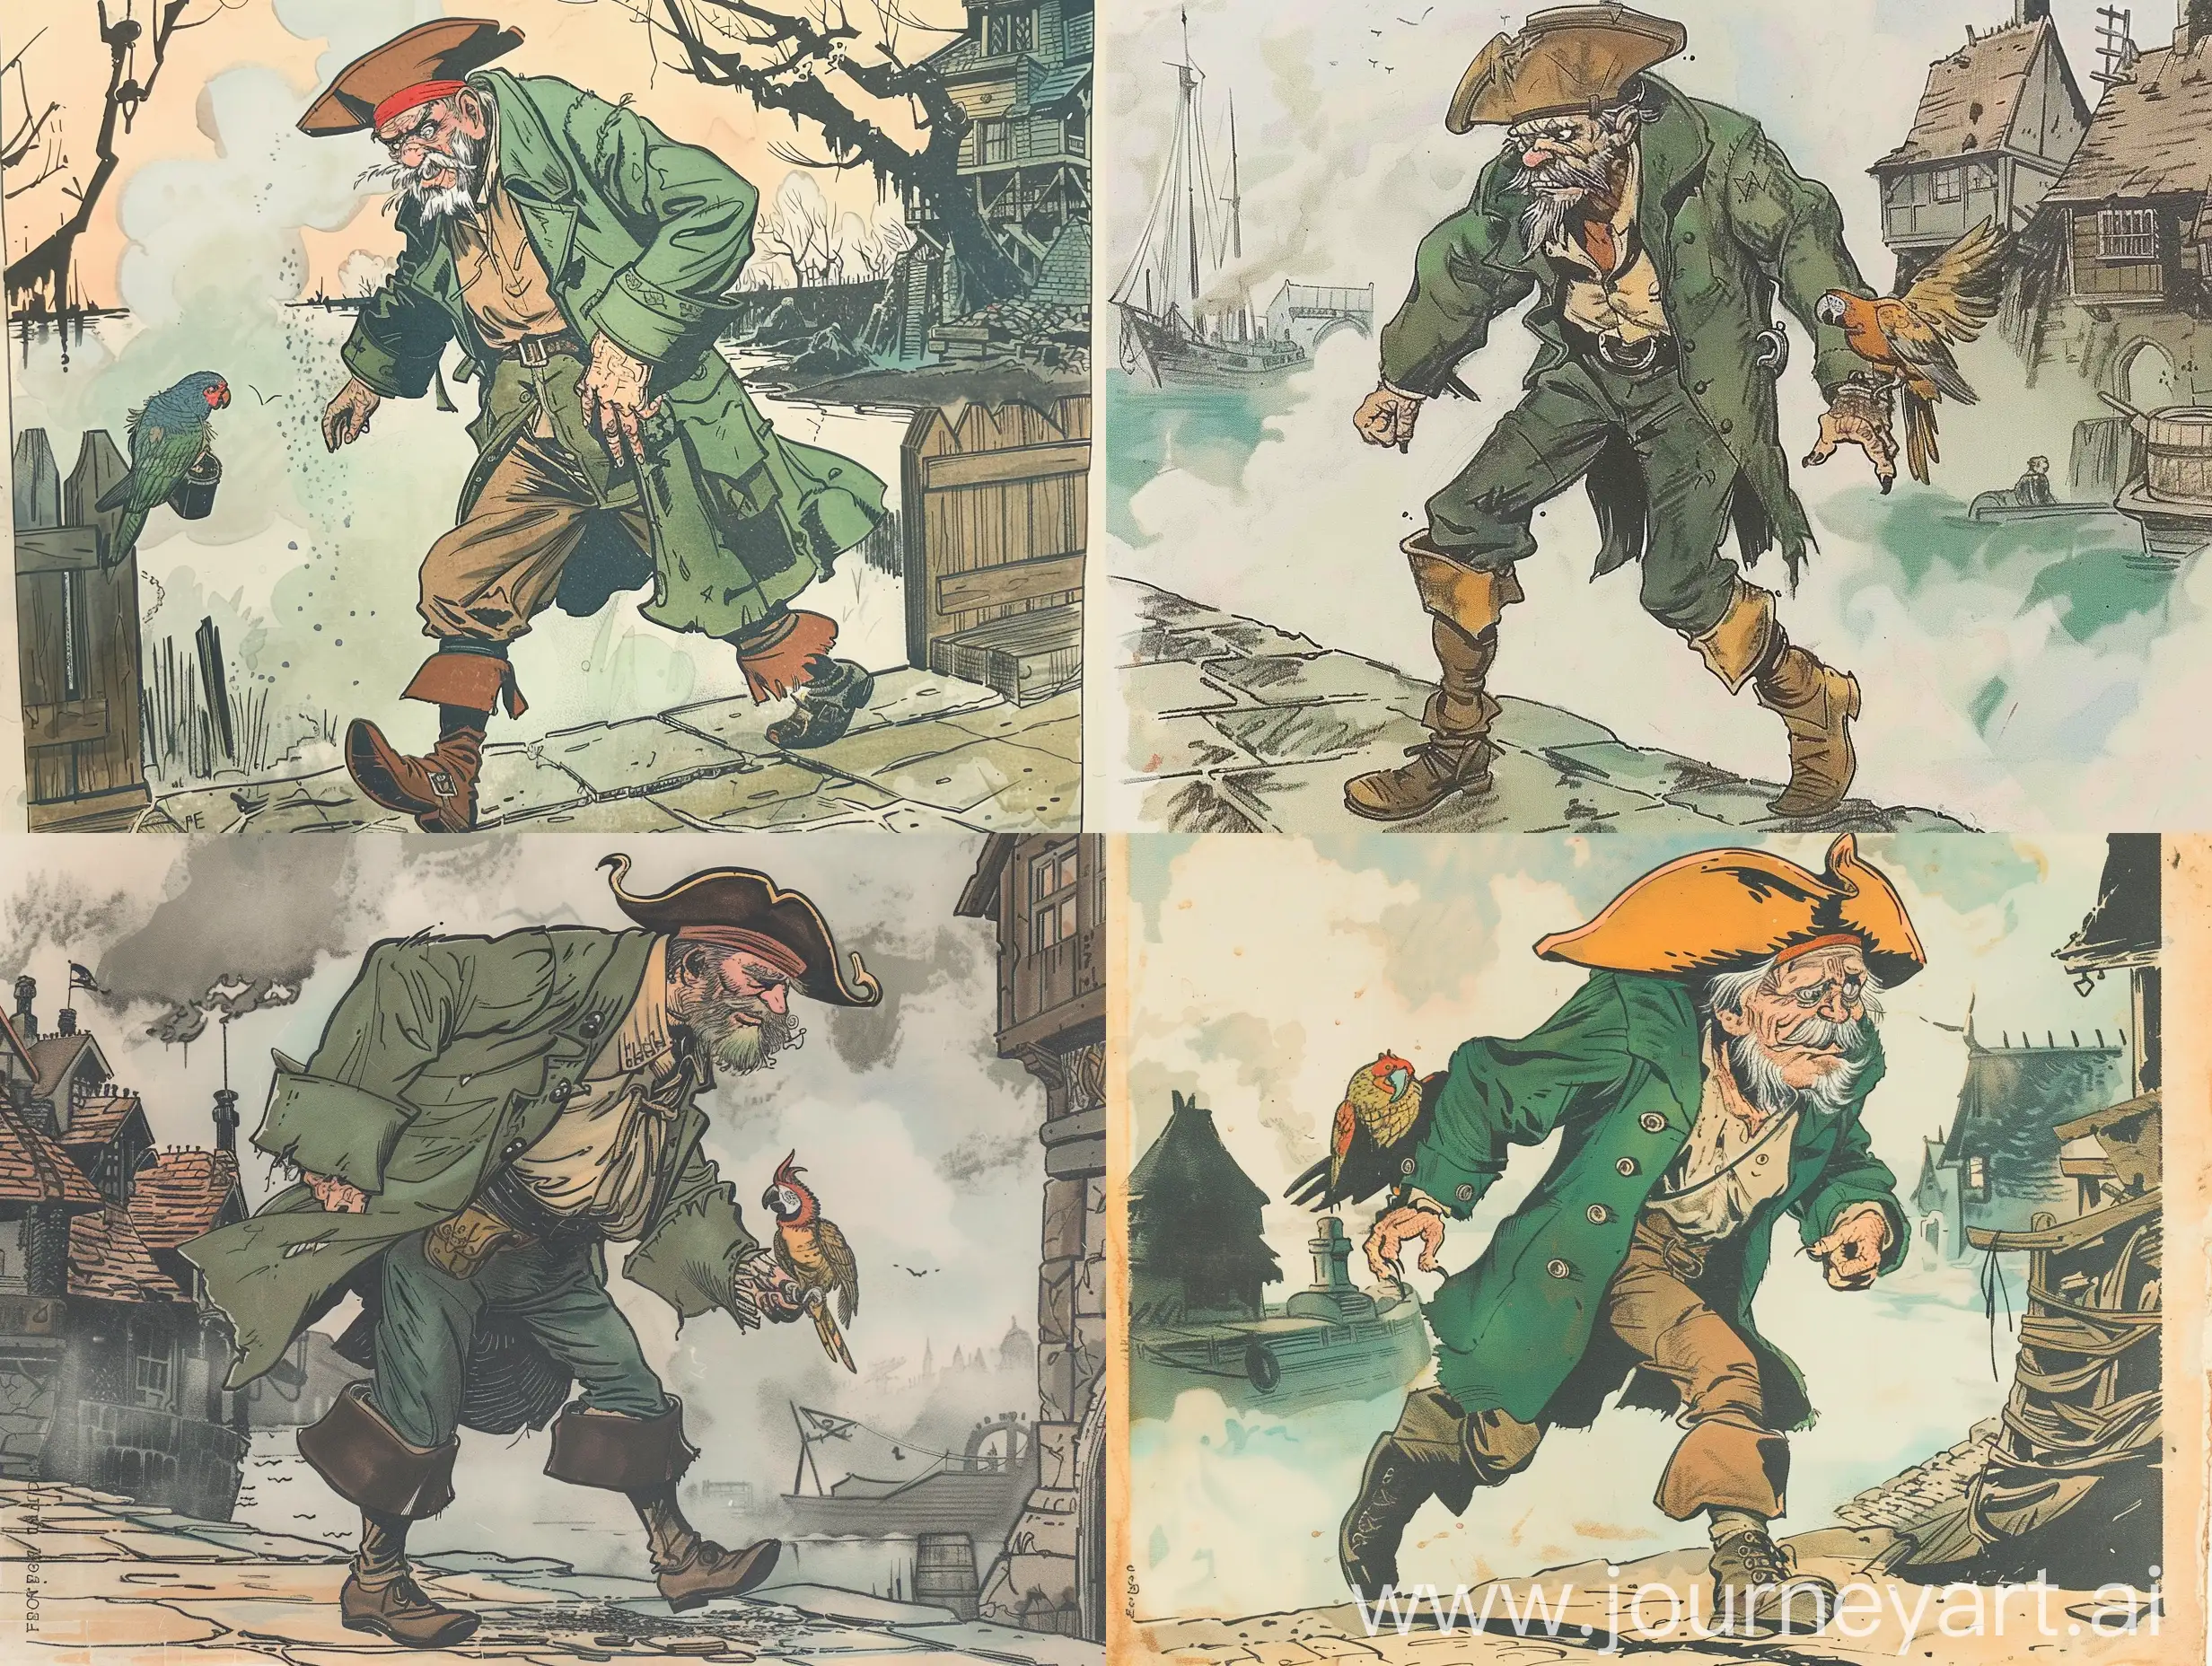 highly detailed 1940s antique comic book coloured drawing sketch of an aging man in a musty green coat with a dirty shirt and pirate hat with brown boots. Walking around a foggy haunted harbour while holding an old parrot.